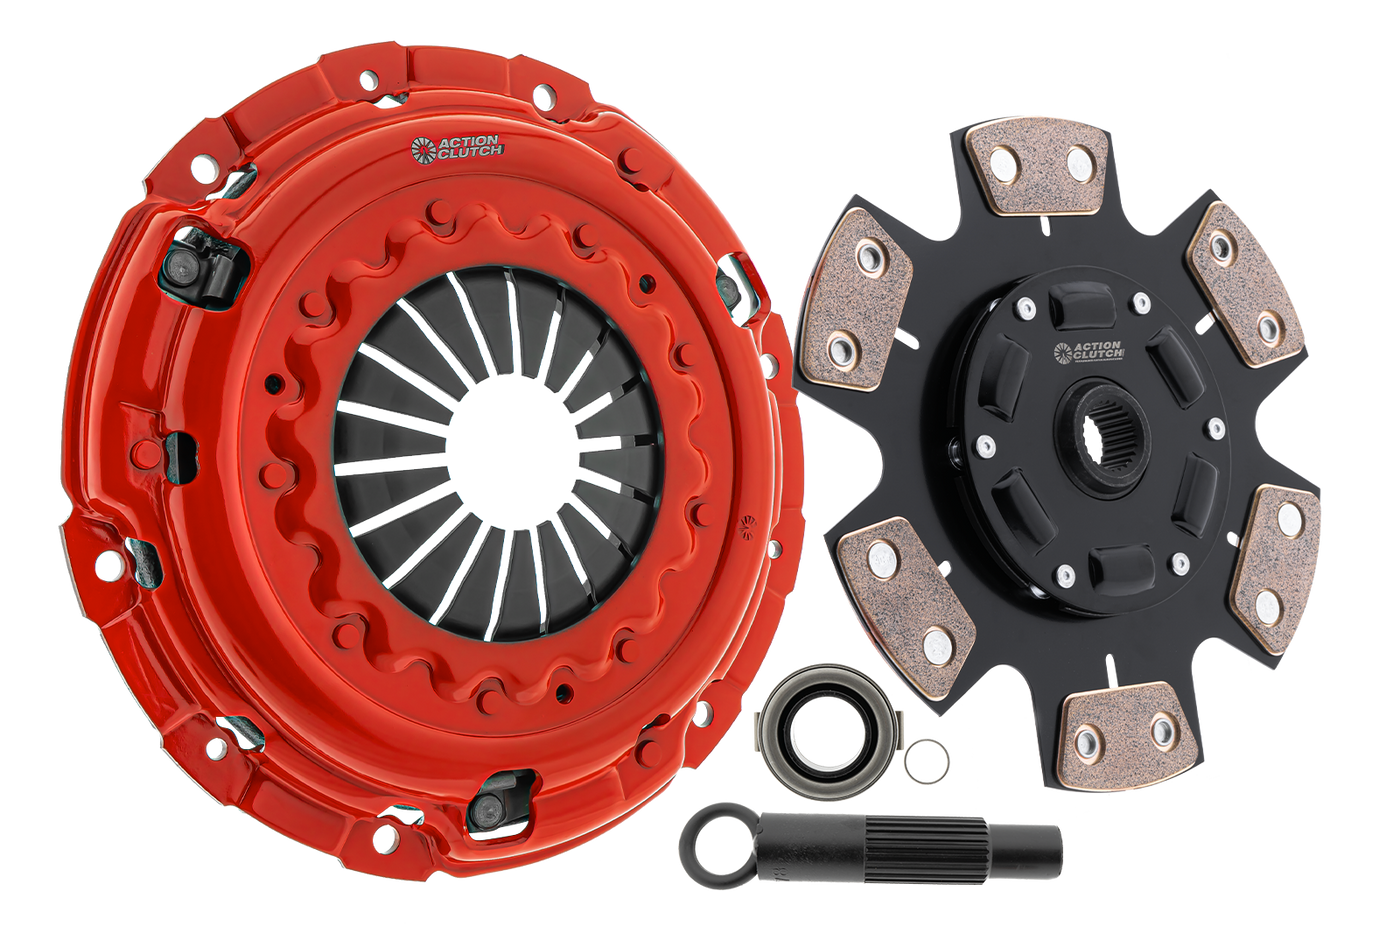 Stage 3 Clutch Kit (1MS) for Toyota Tacoma 2005-2017 2.7L (2TRFE)